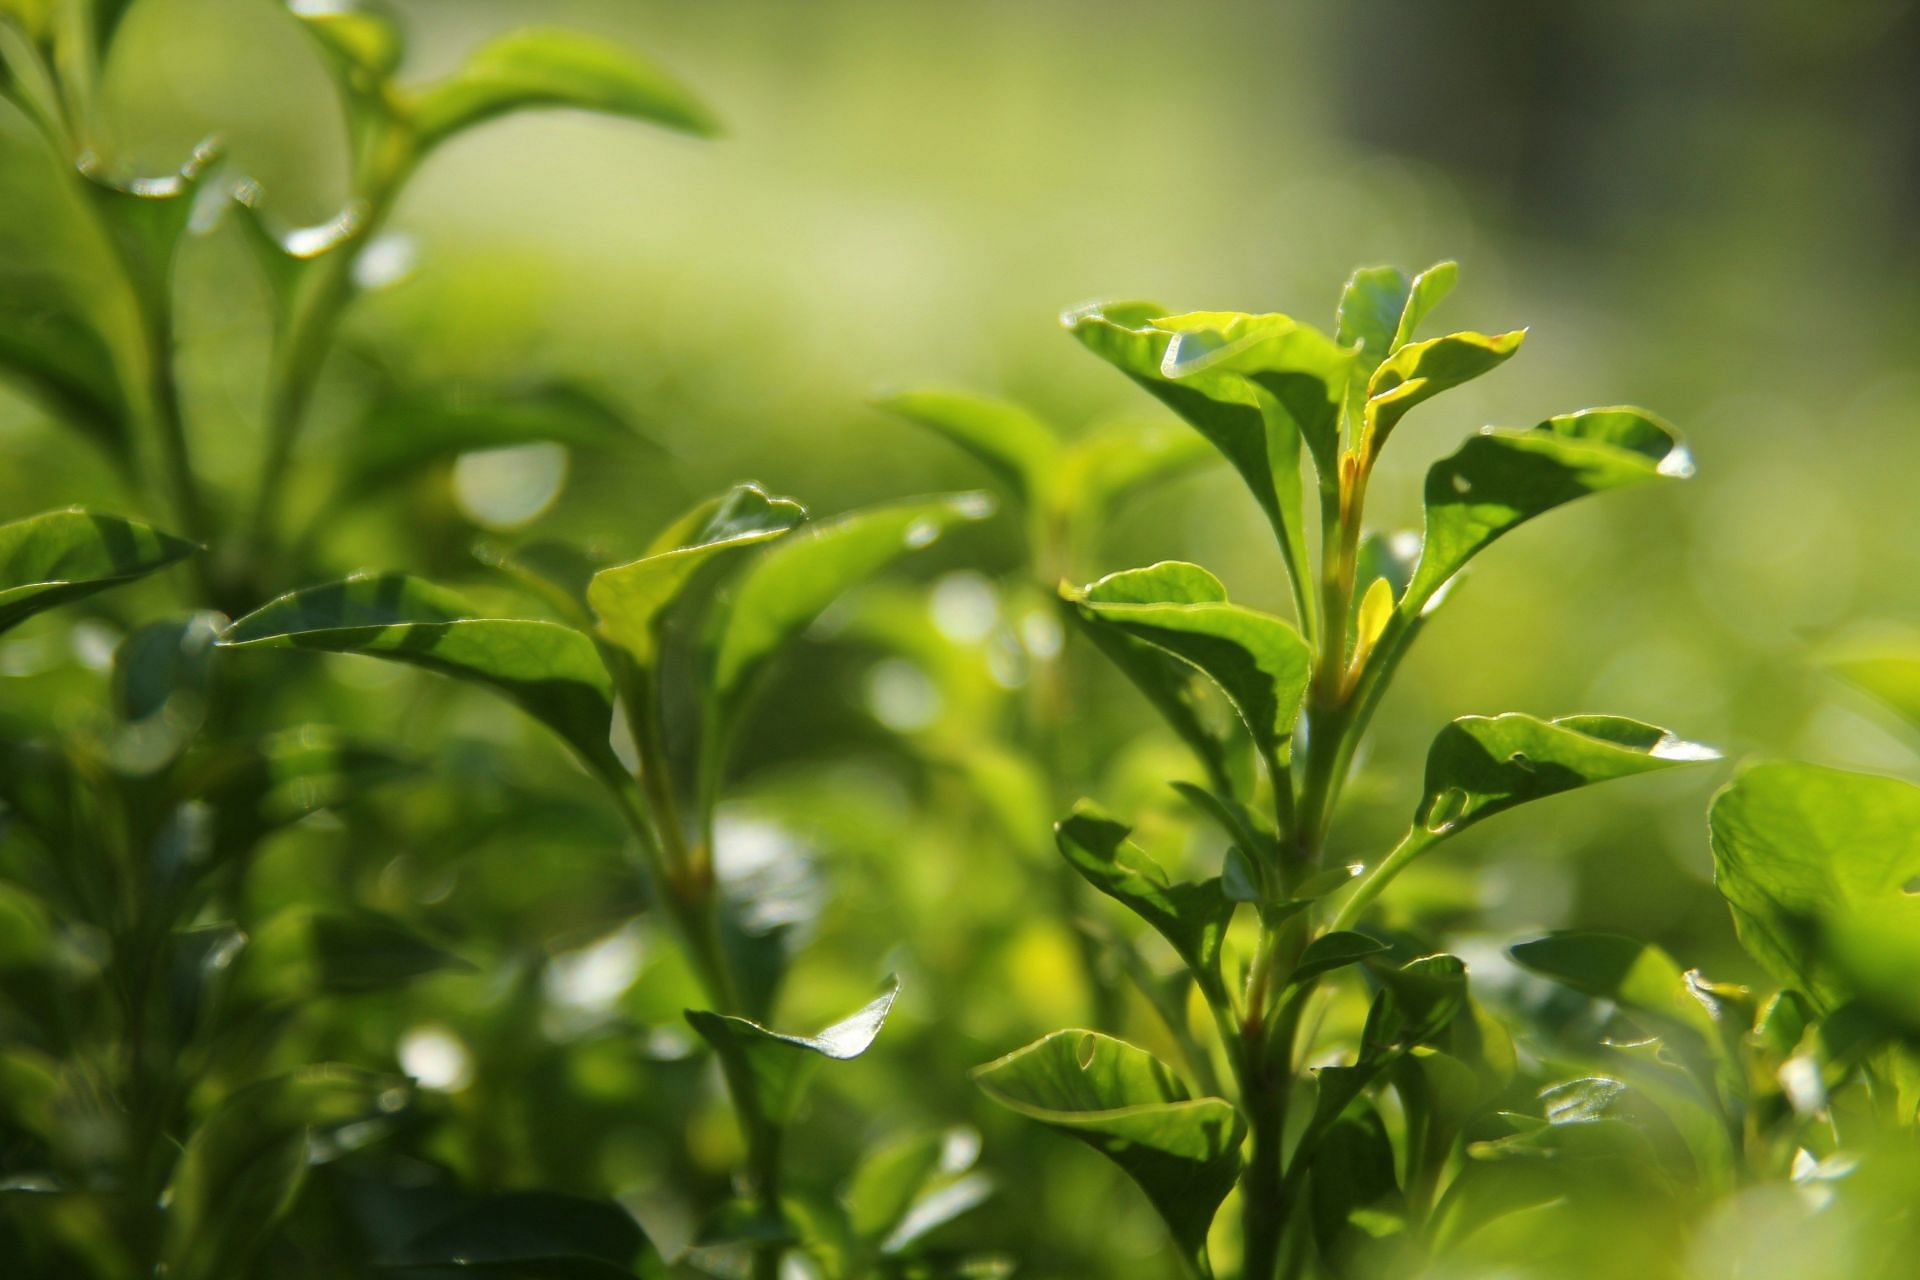 Homemade toner made with green tea leaves (Image by Timothy Newman/Unsplash)